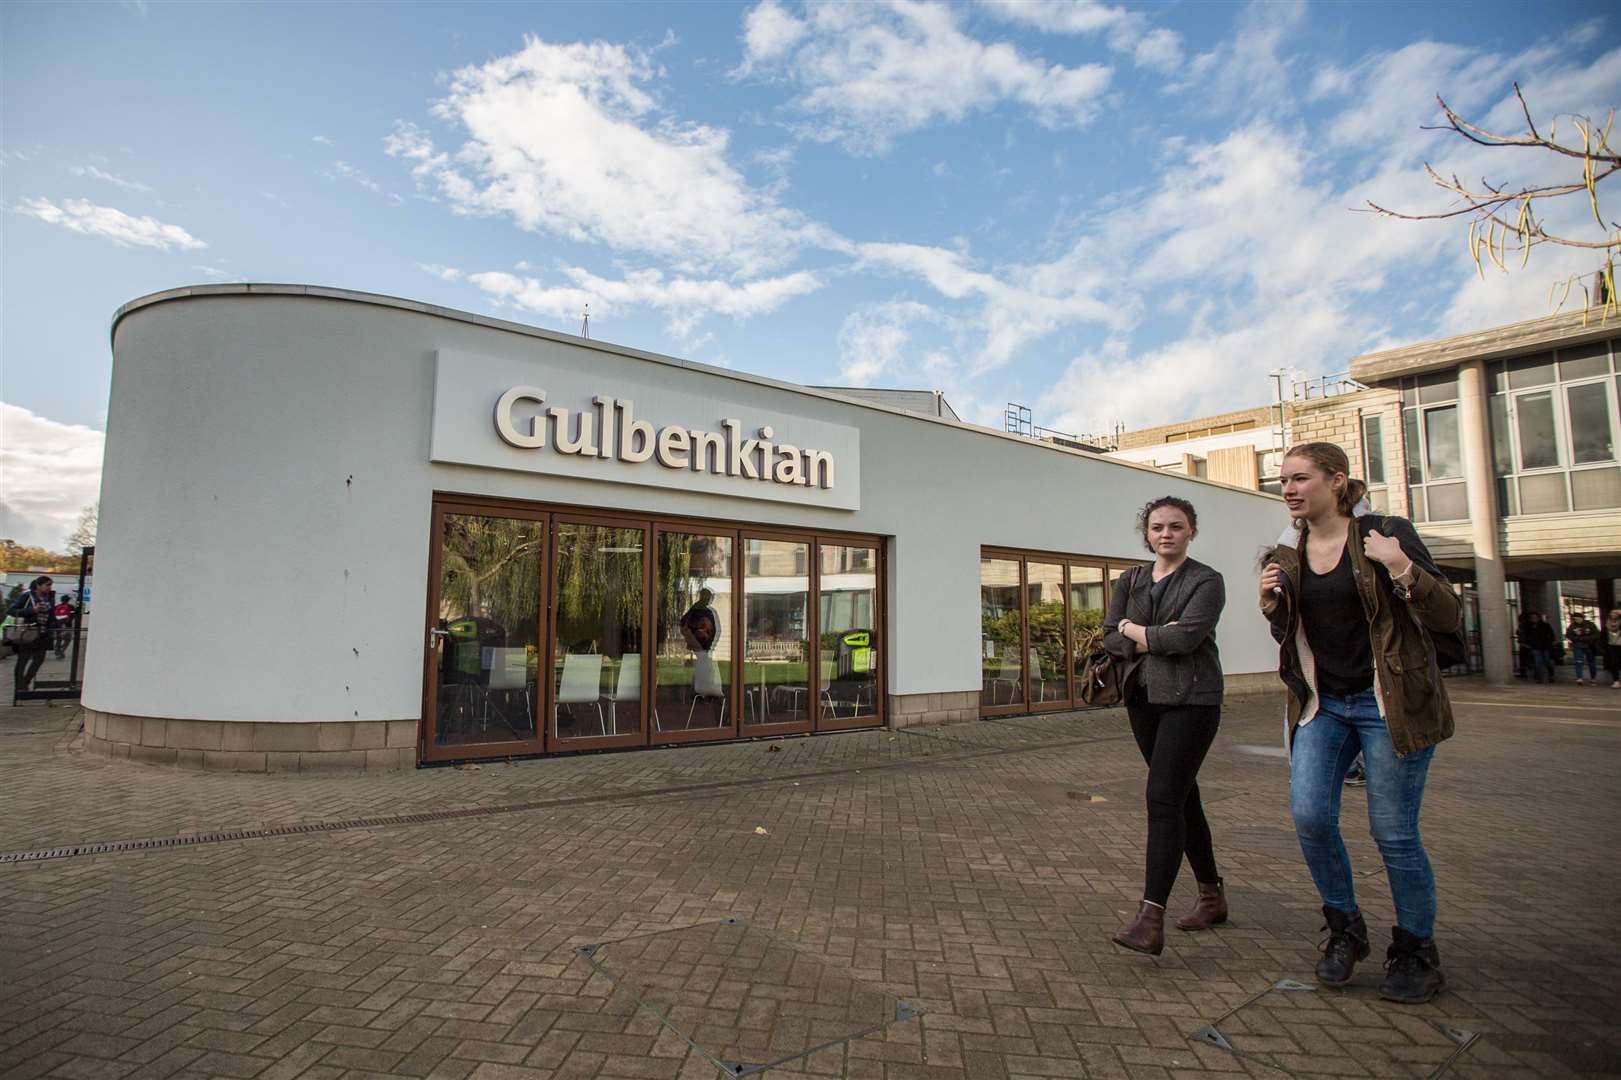 The Gulbenkian's cinema may open before its theatre